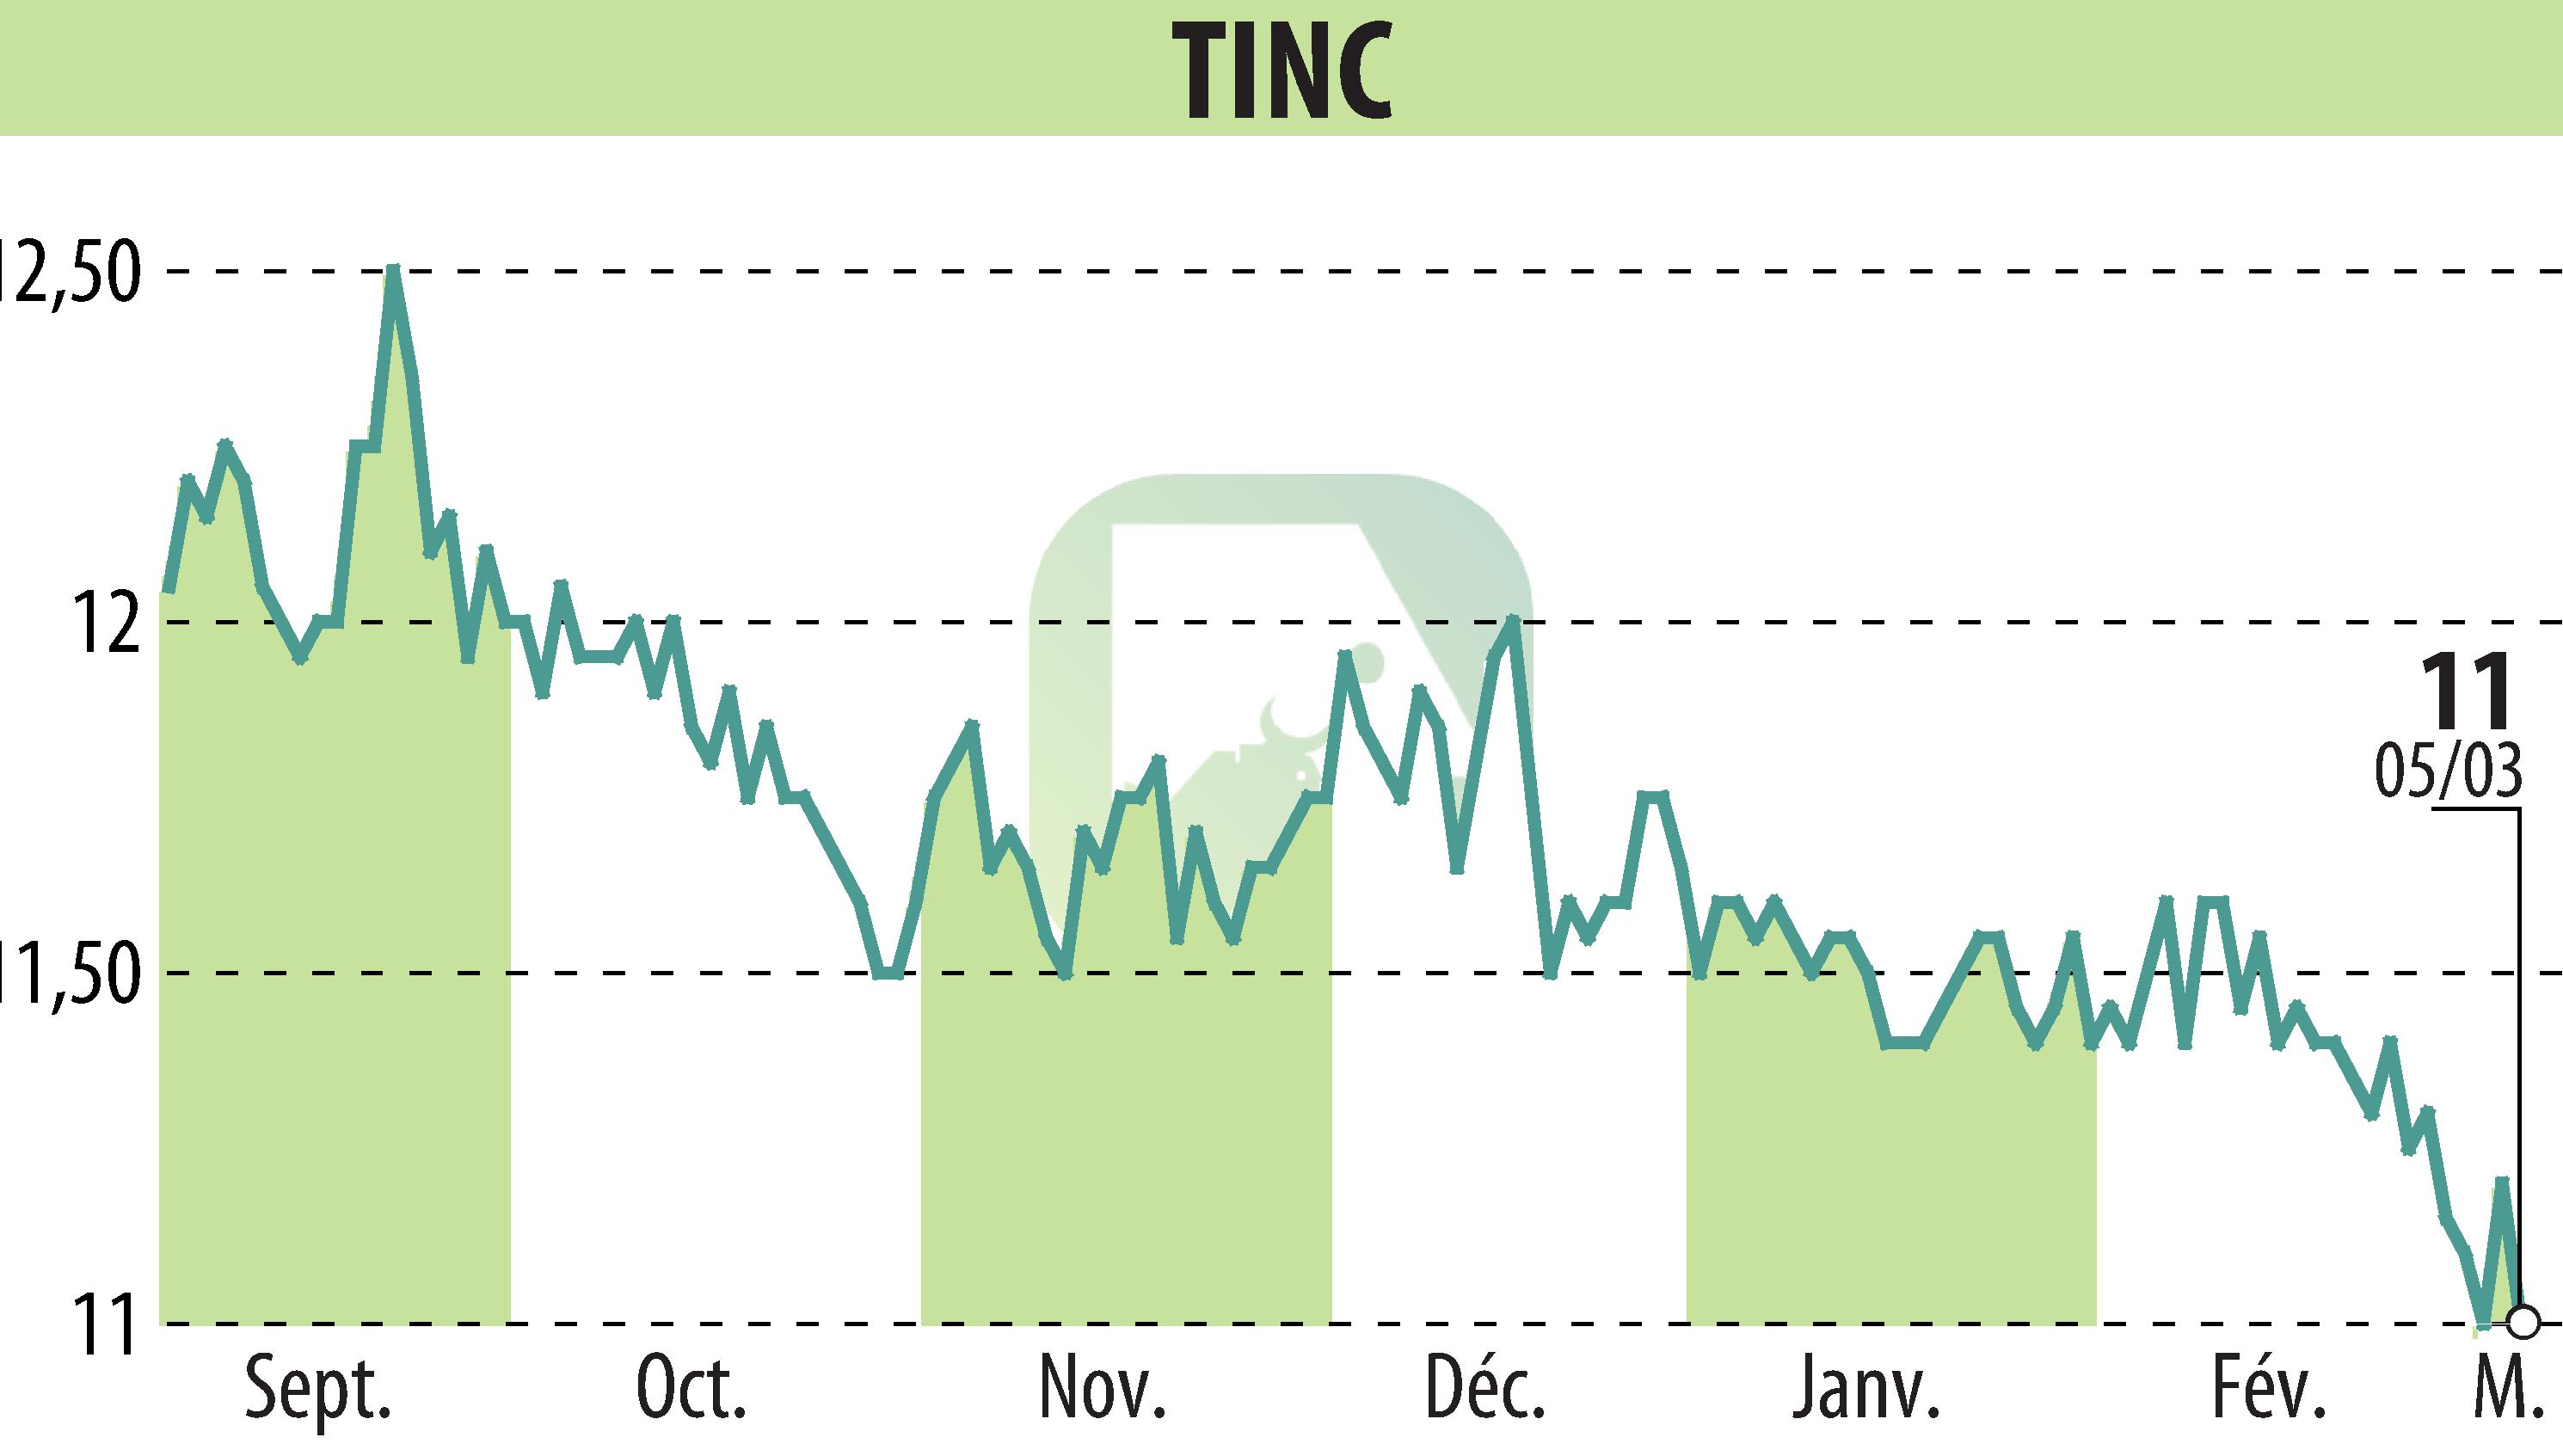 Stock price chart of TINC (EBR:TINC) showing fluctuations.